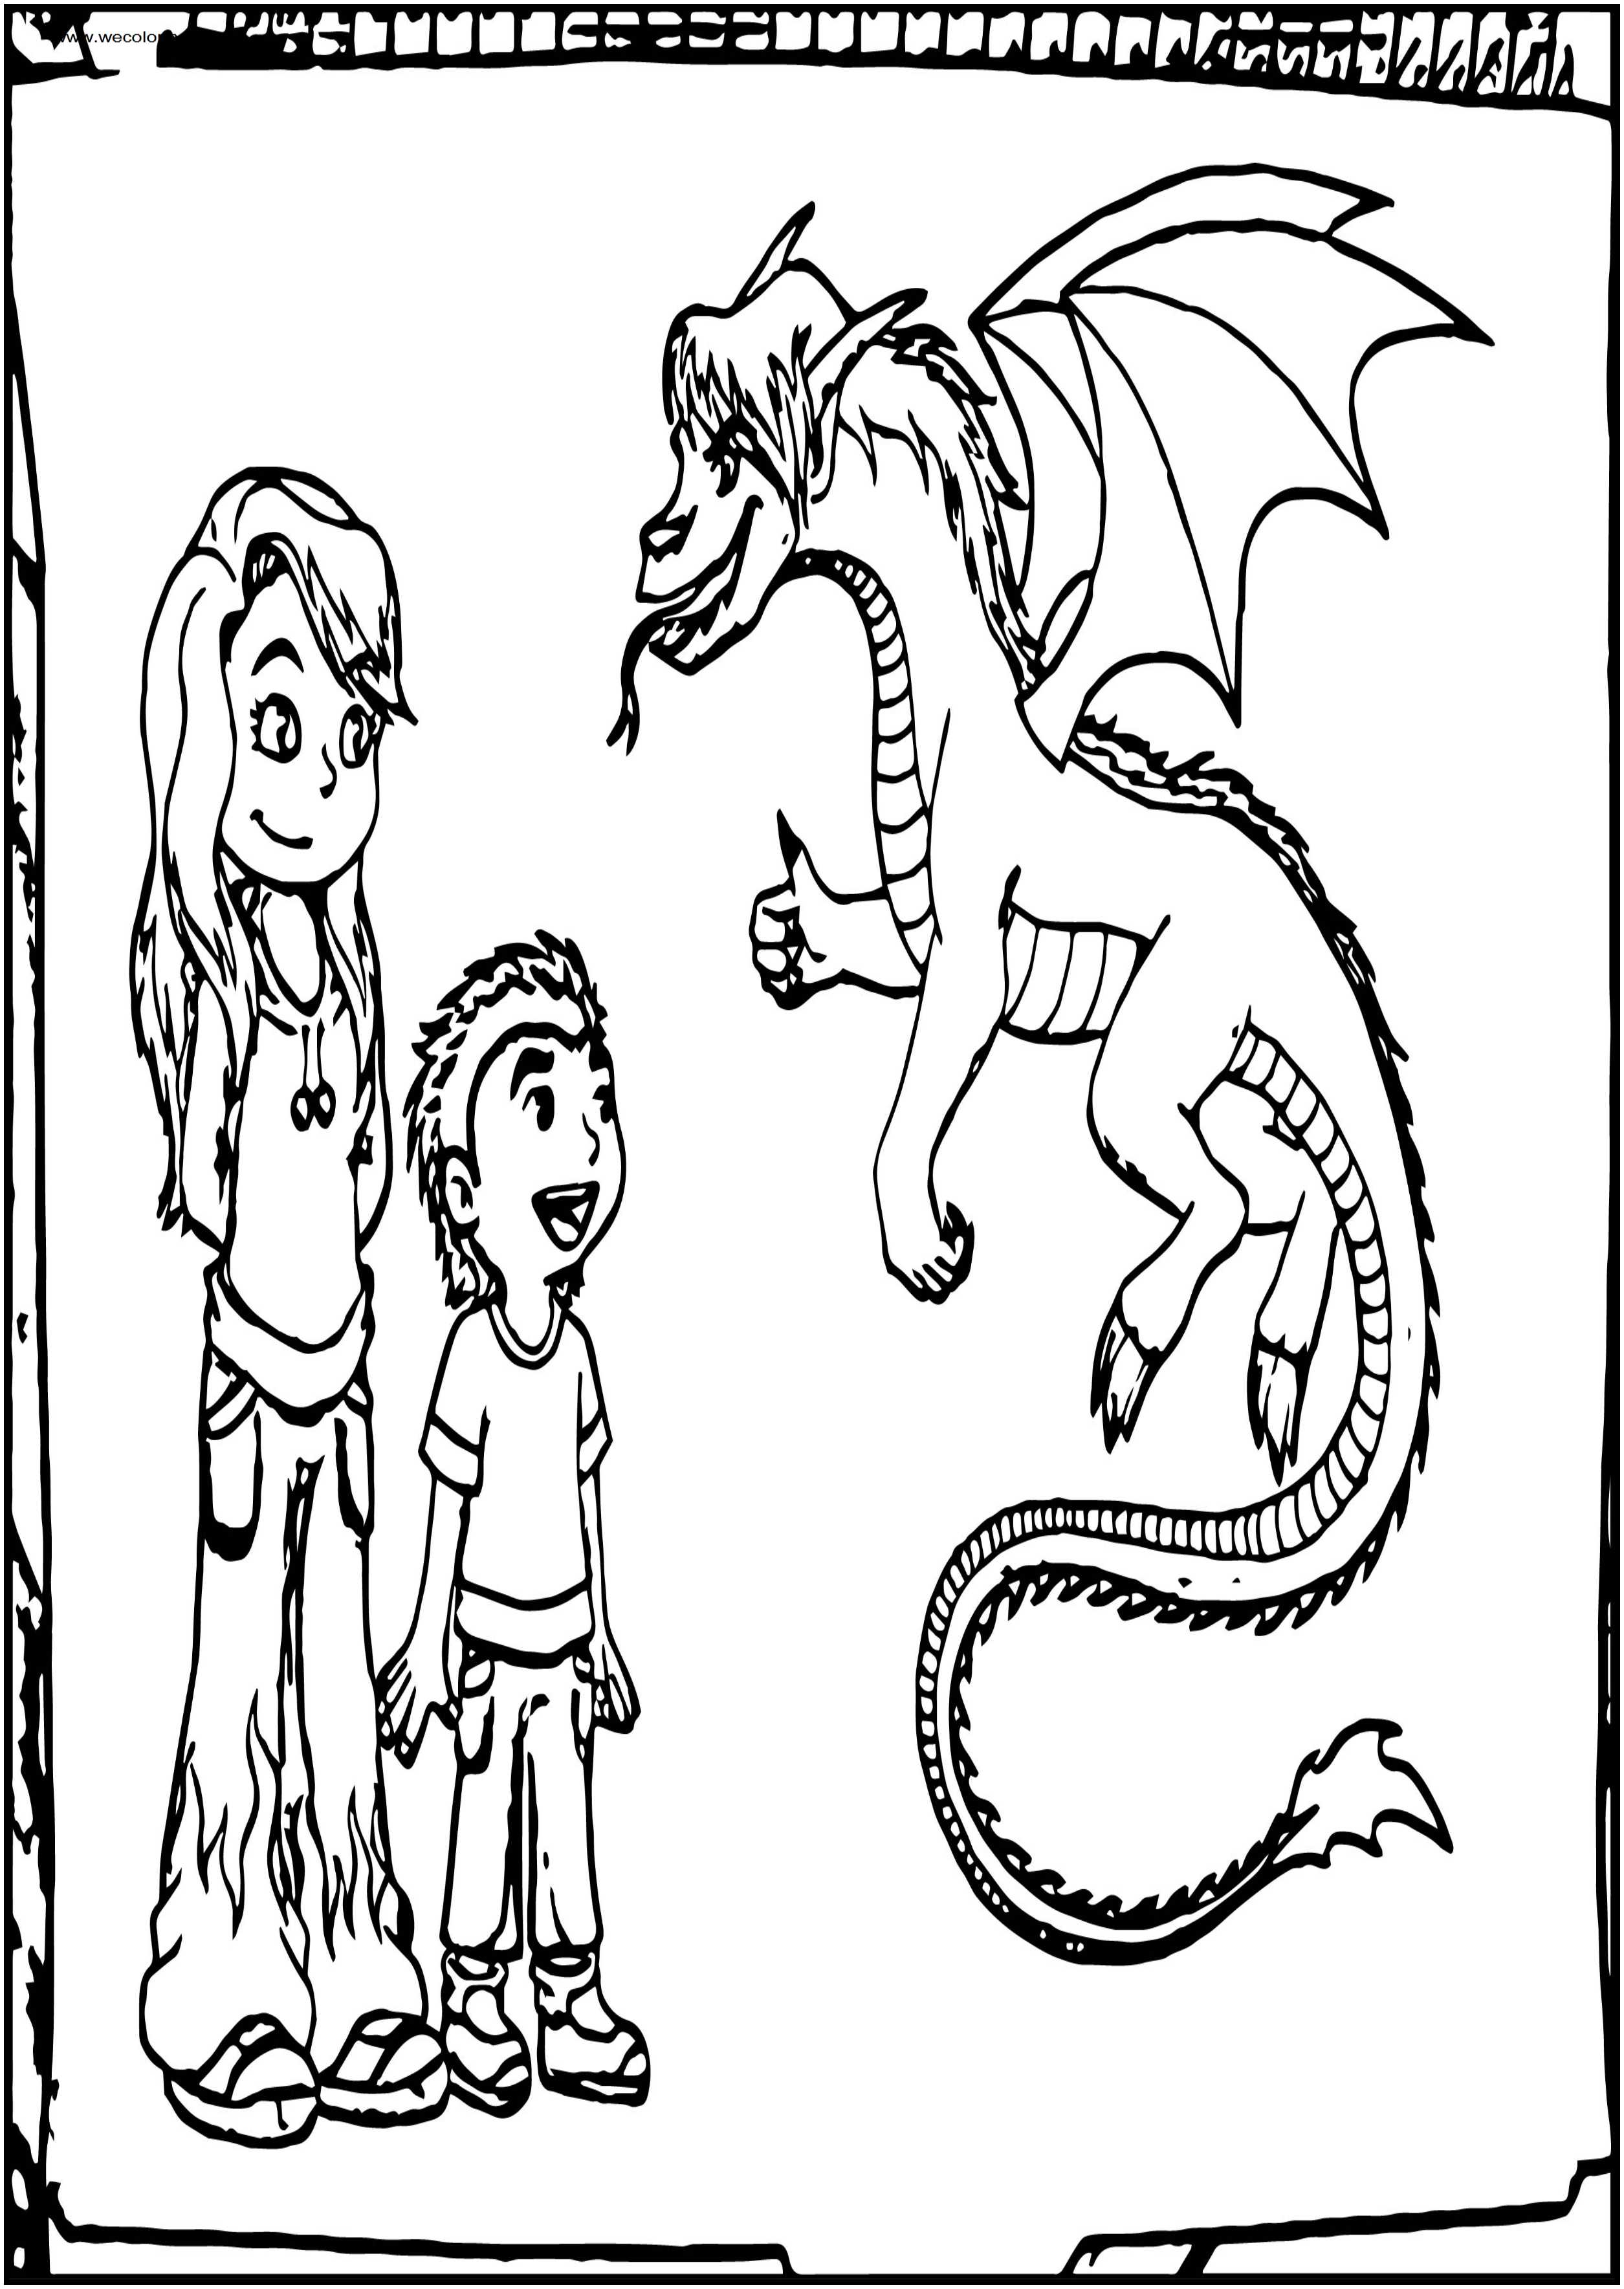 some-fan-chars-of-american-dragon-free-a4-printable-coloring-page